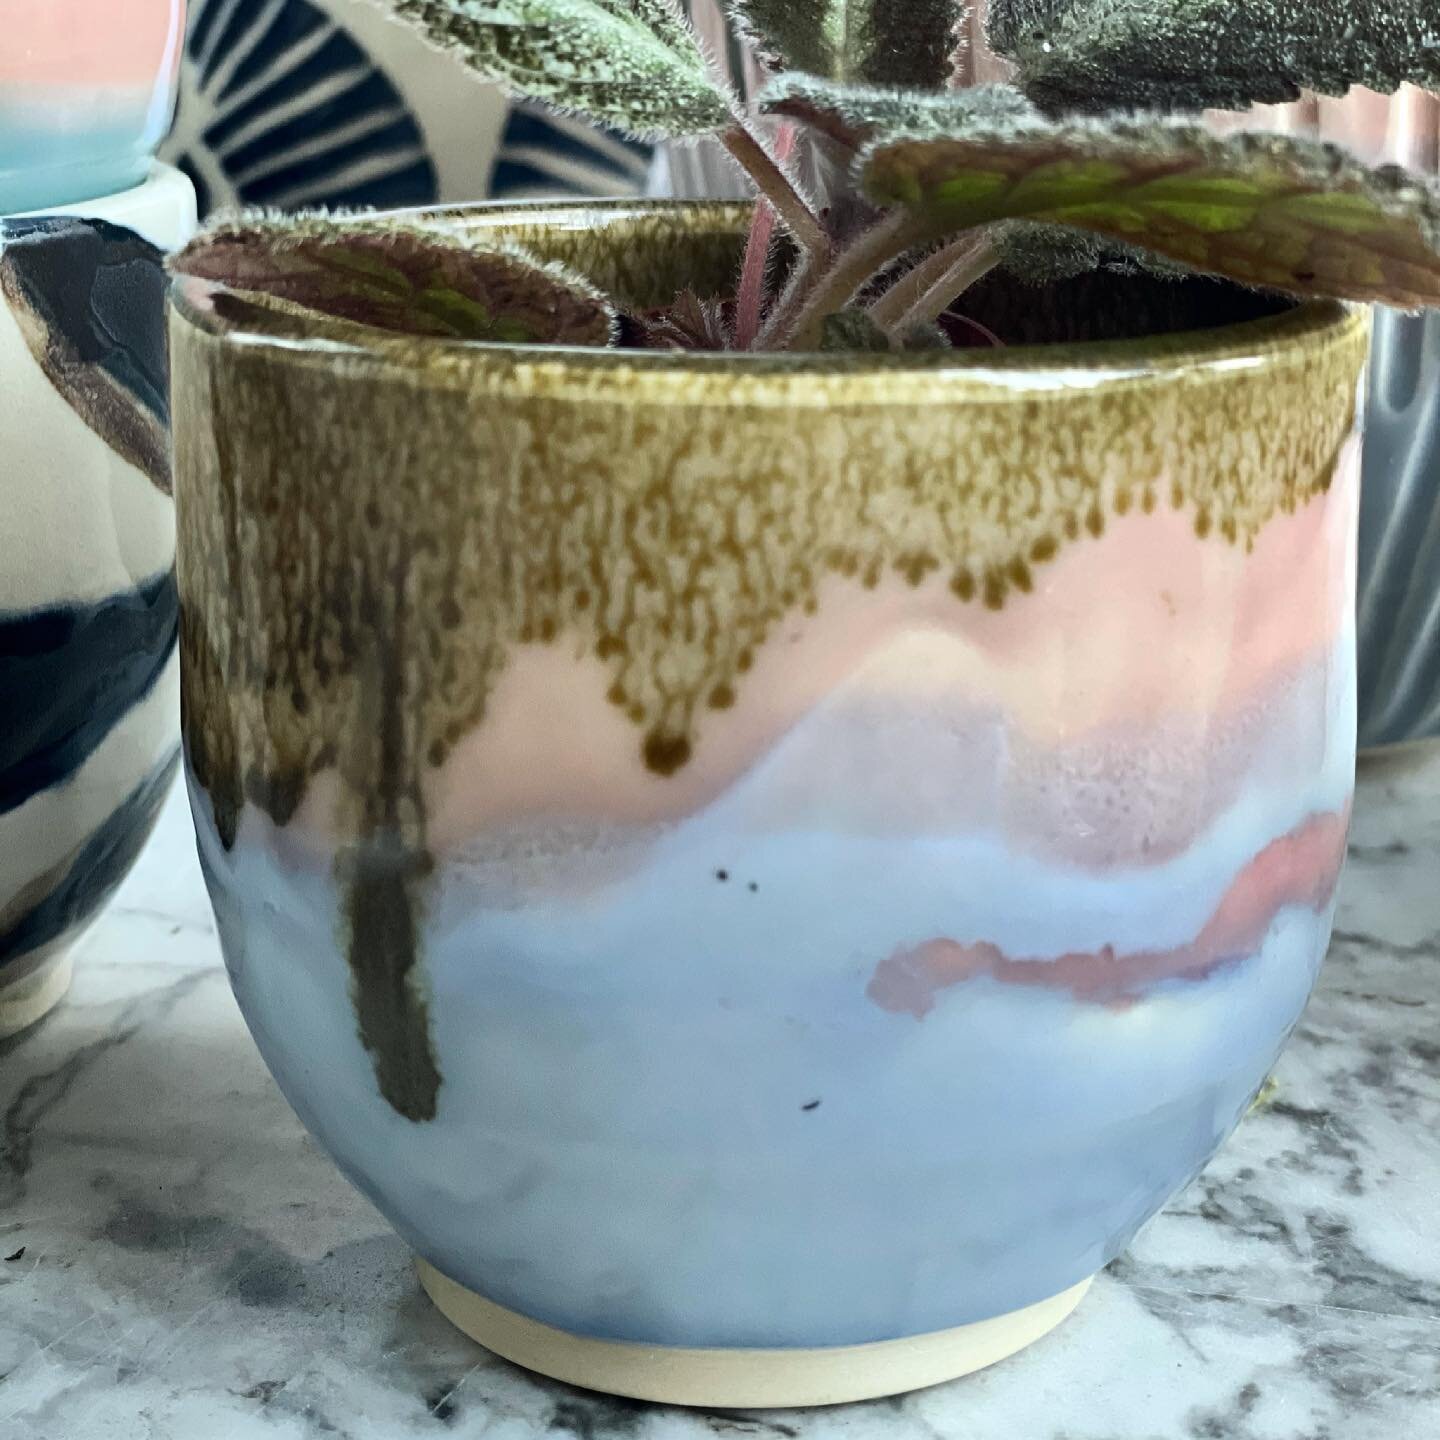 This little pot is telling the story of getting fired five times, dabbed with glaze where it had a bare spot. Happy result of all the stress with my kiln the last two weeks. I adore it. This is one that&rsquo;s going to be hard to let go of!